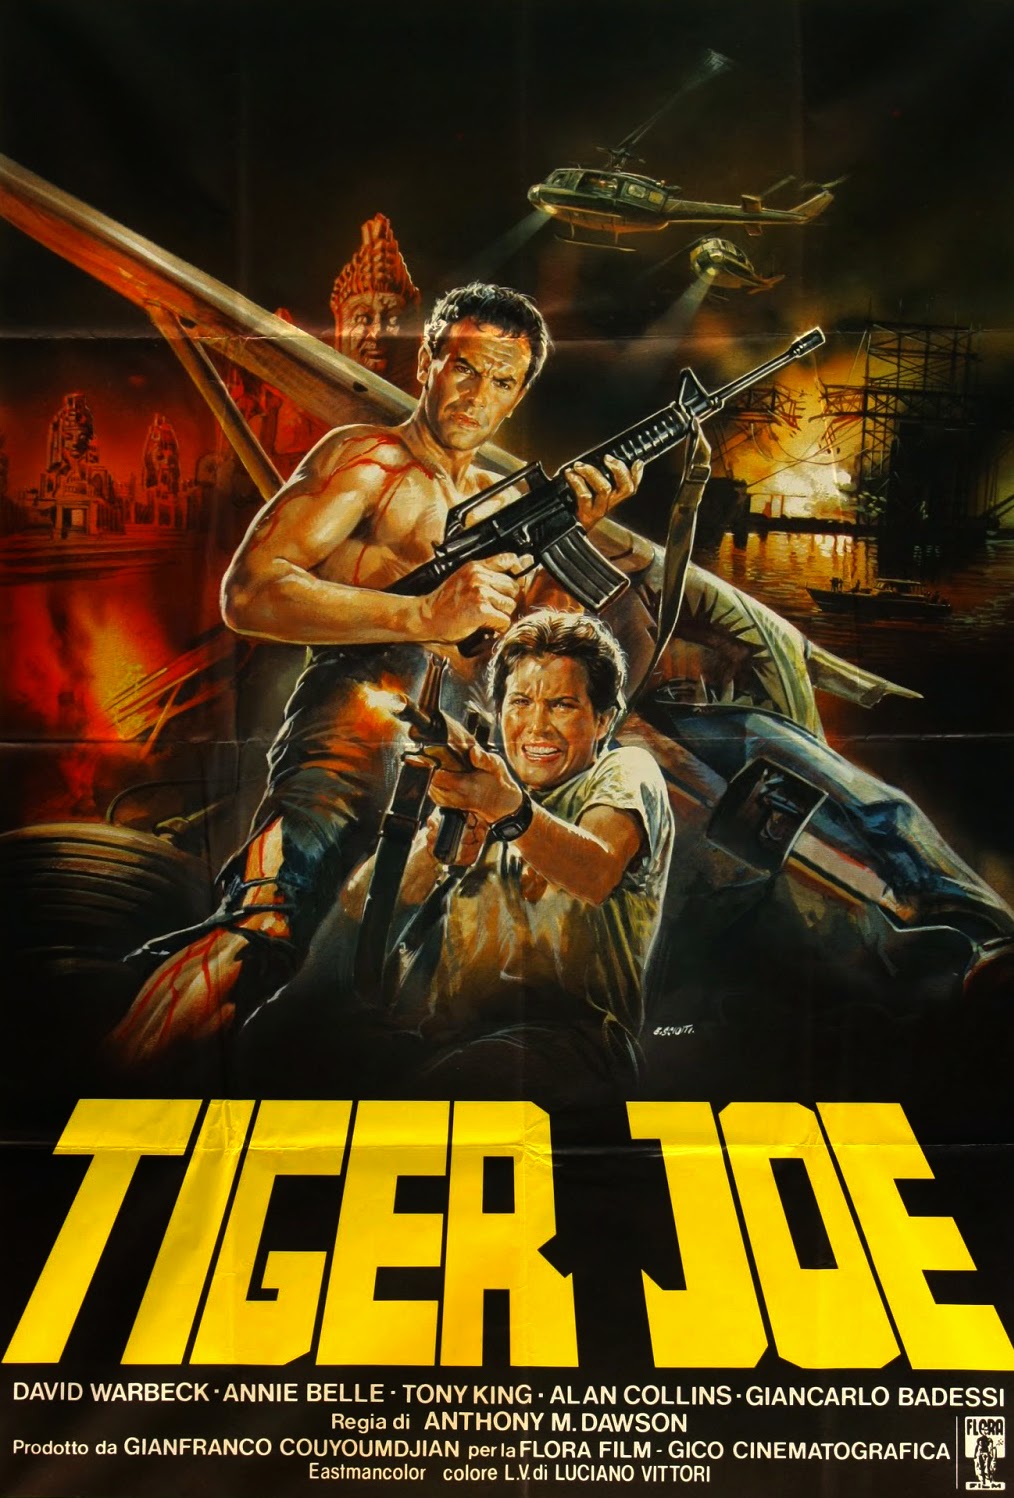 the tiger hunter movie what rifle